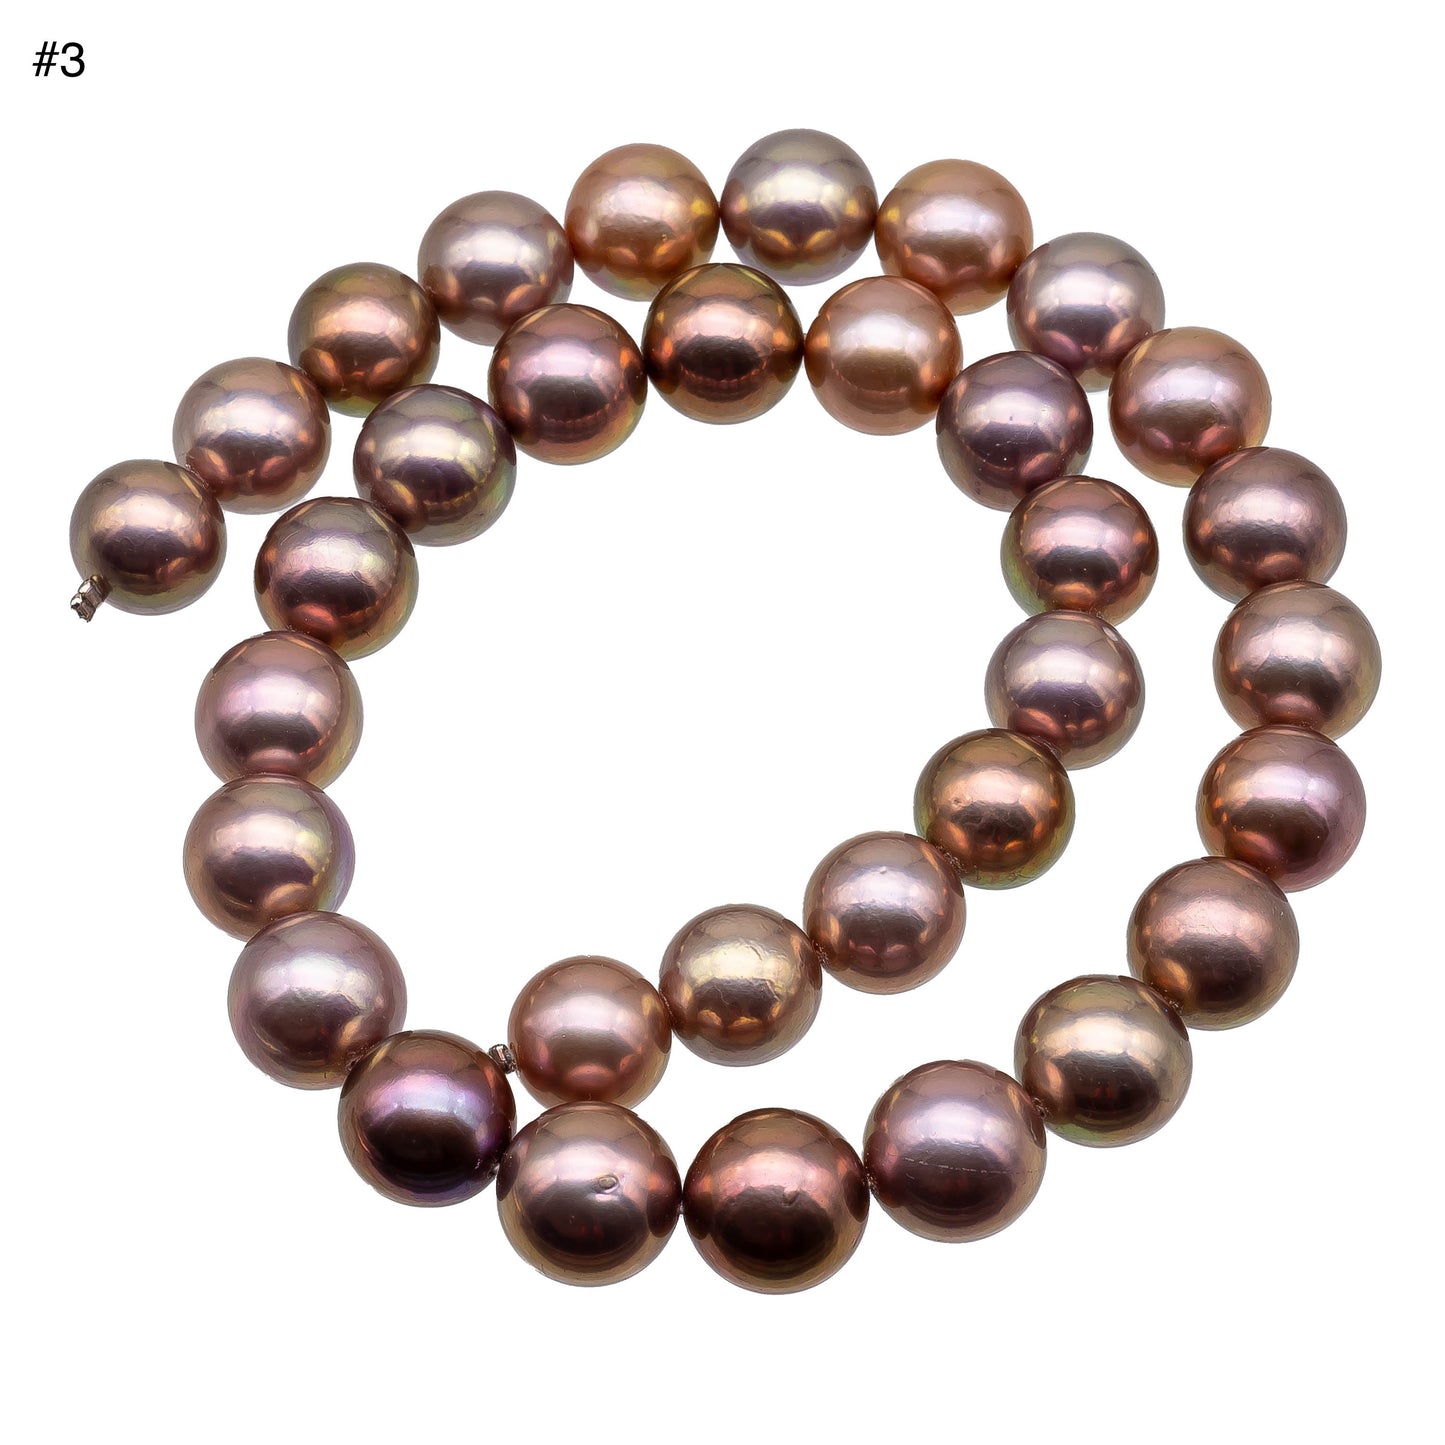 12-14mm Edison Pearl Round or Near Round Natural Mix Color with Extremely Nice Luster, Very Limited Blemish, For Jewelry Making, SKU# 1155EP